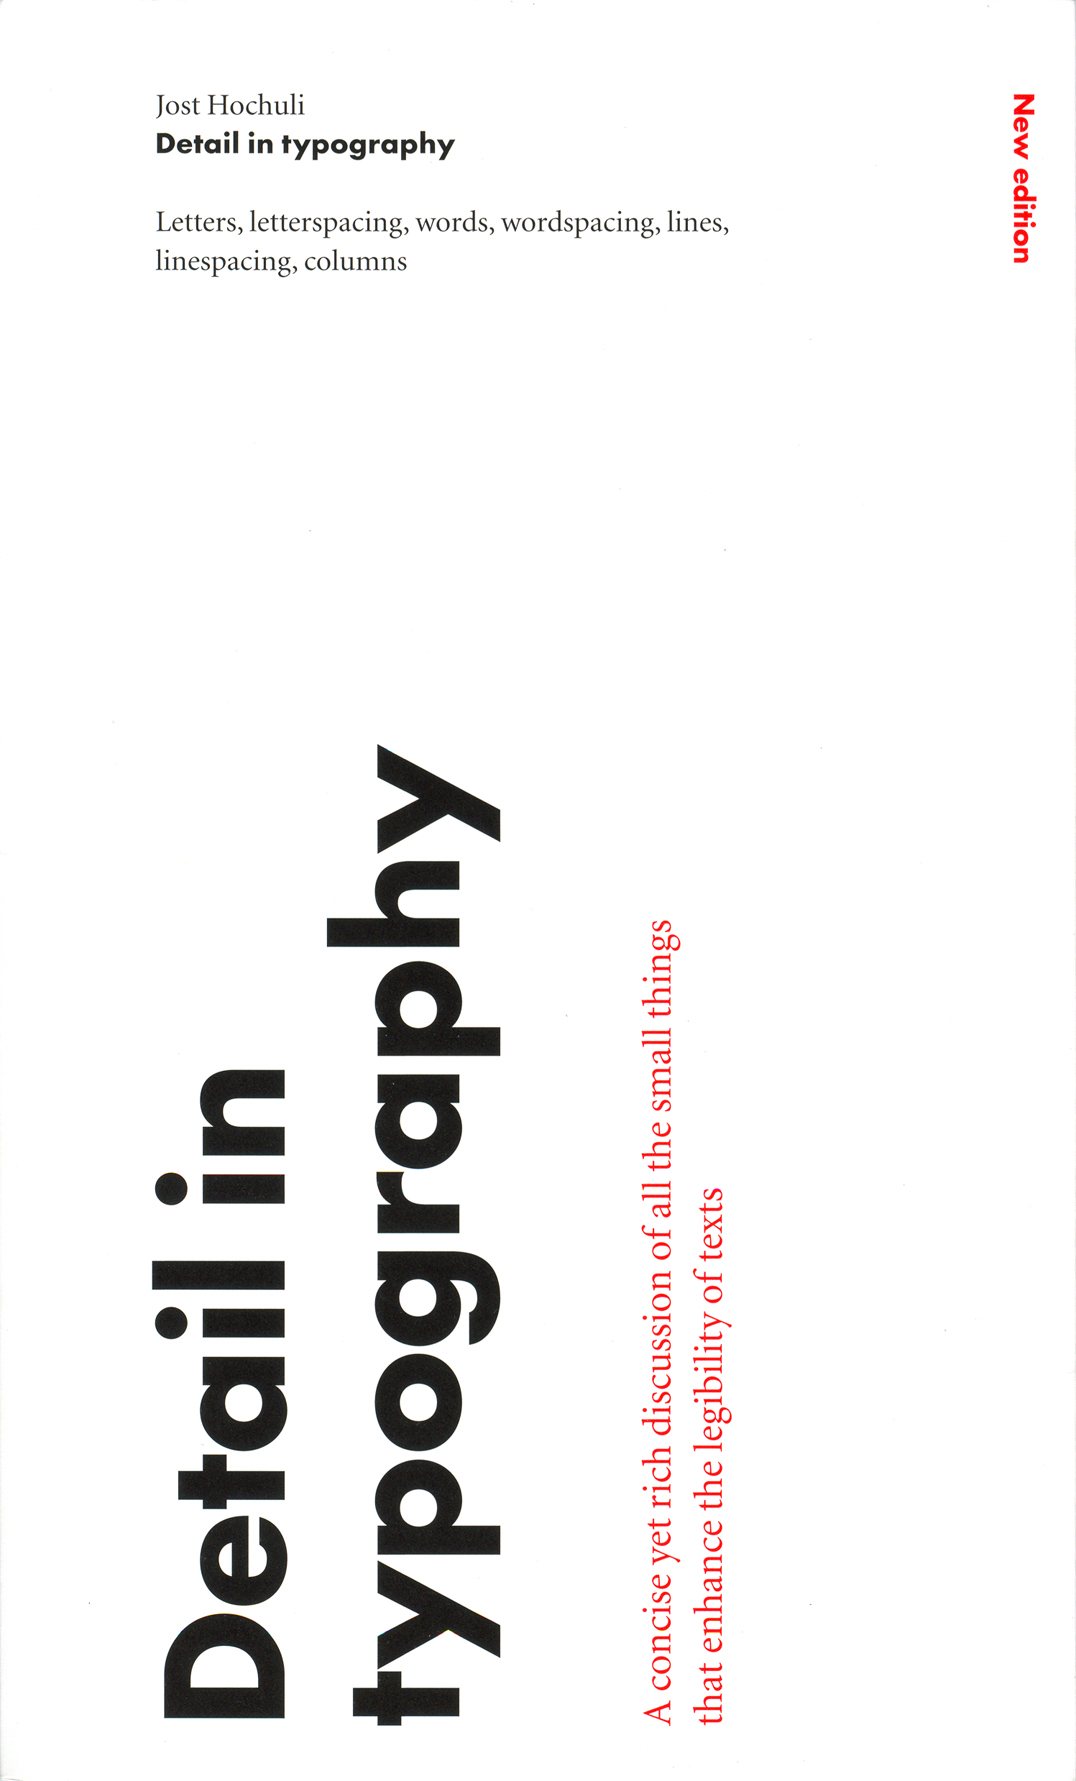 ‘Detail in typography’ available again